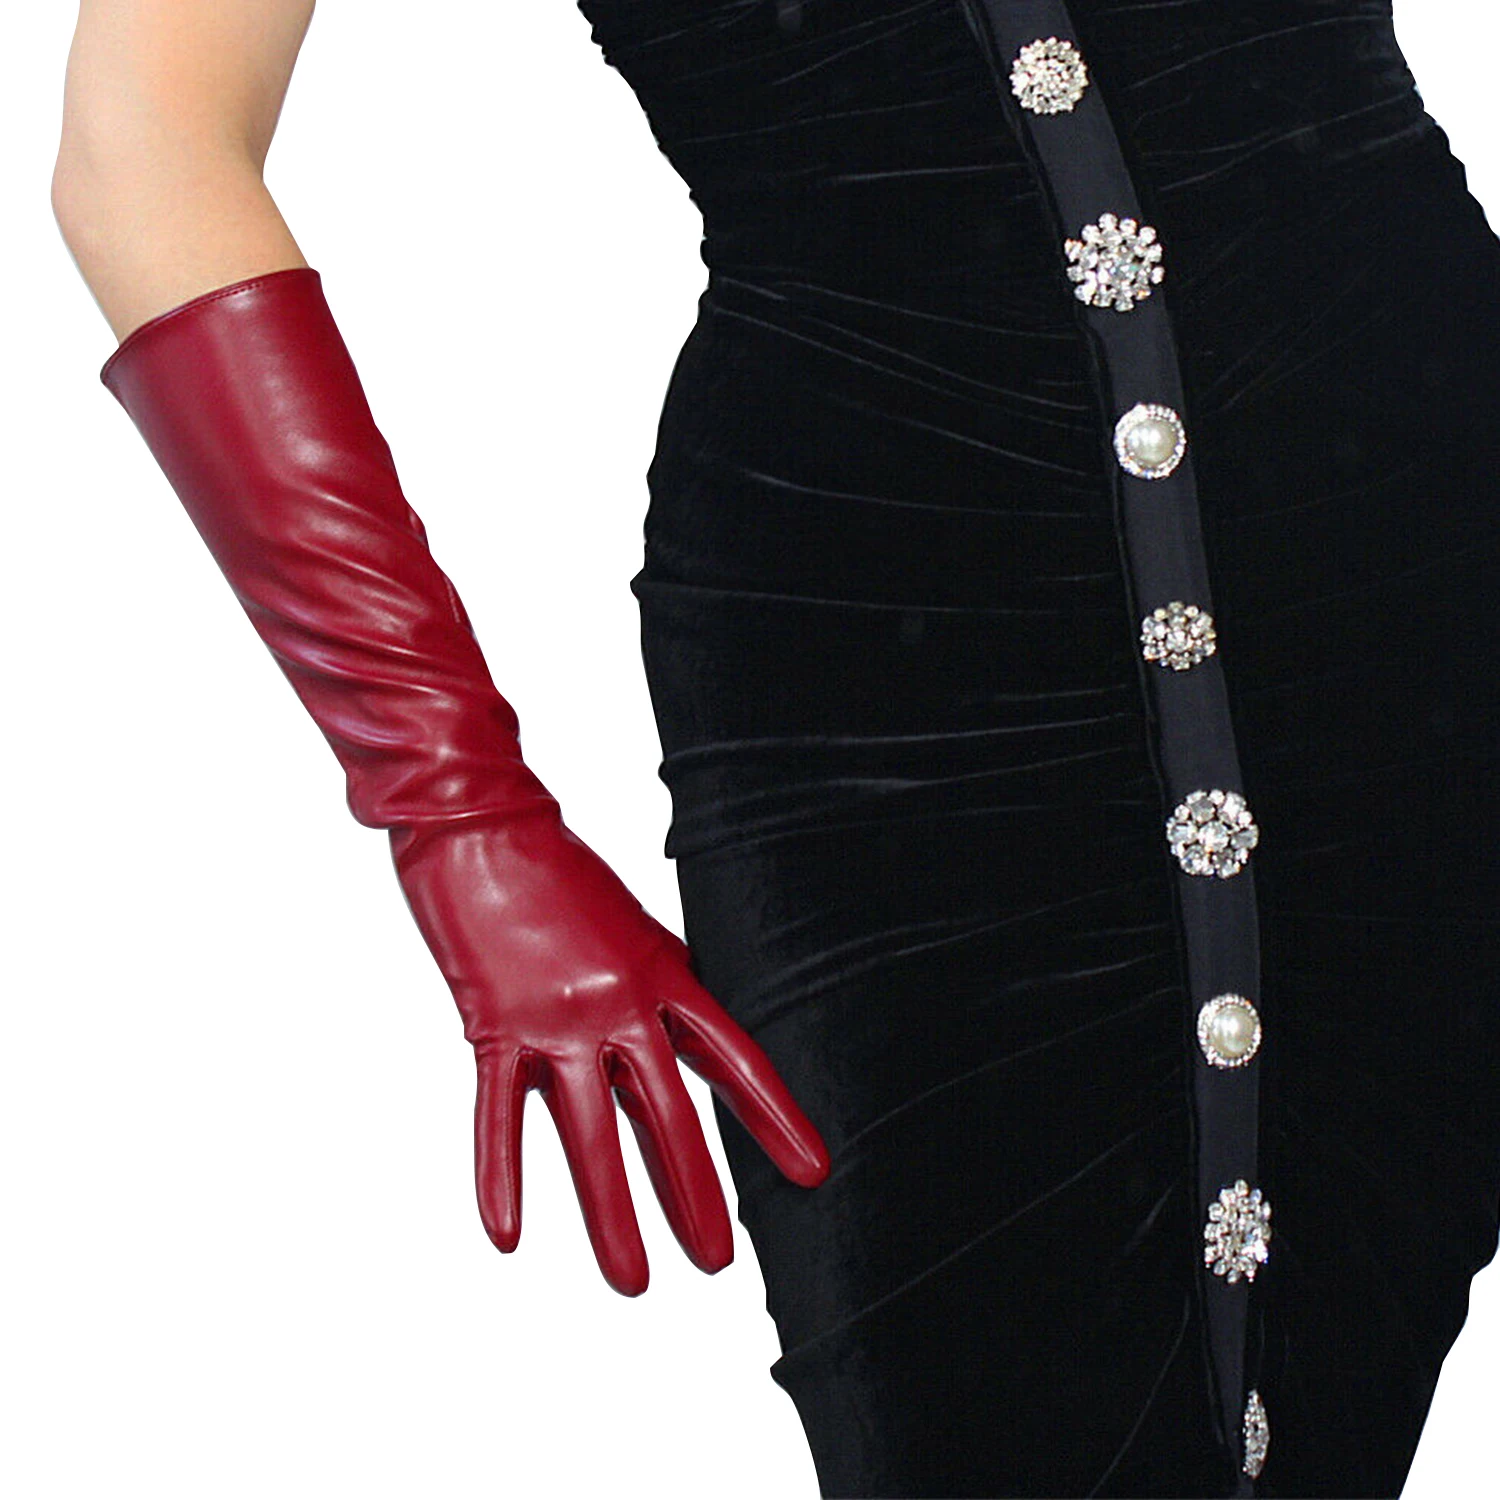 

DooWay Women's Burgundy Long Leather Gloves Elbow Length Dark Red Wine Stretchy Faux Leather PU Party Costume Dressing Glove